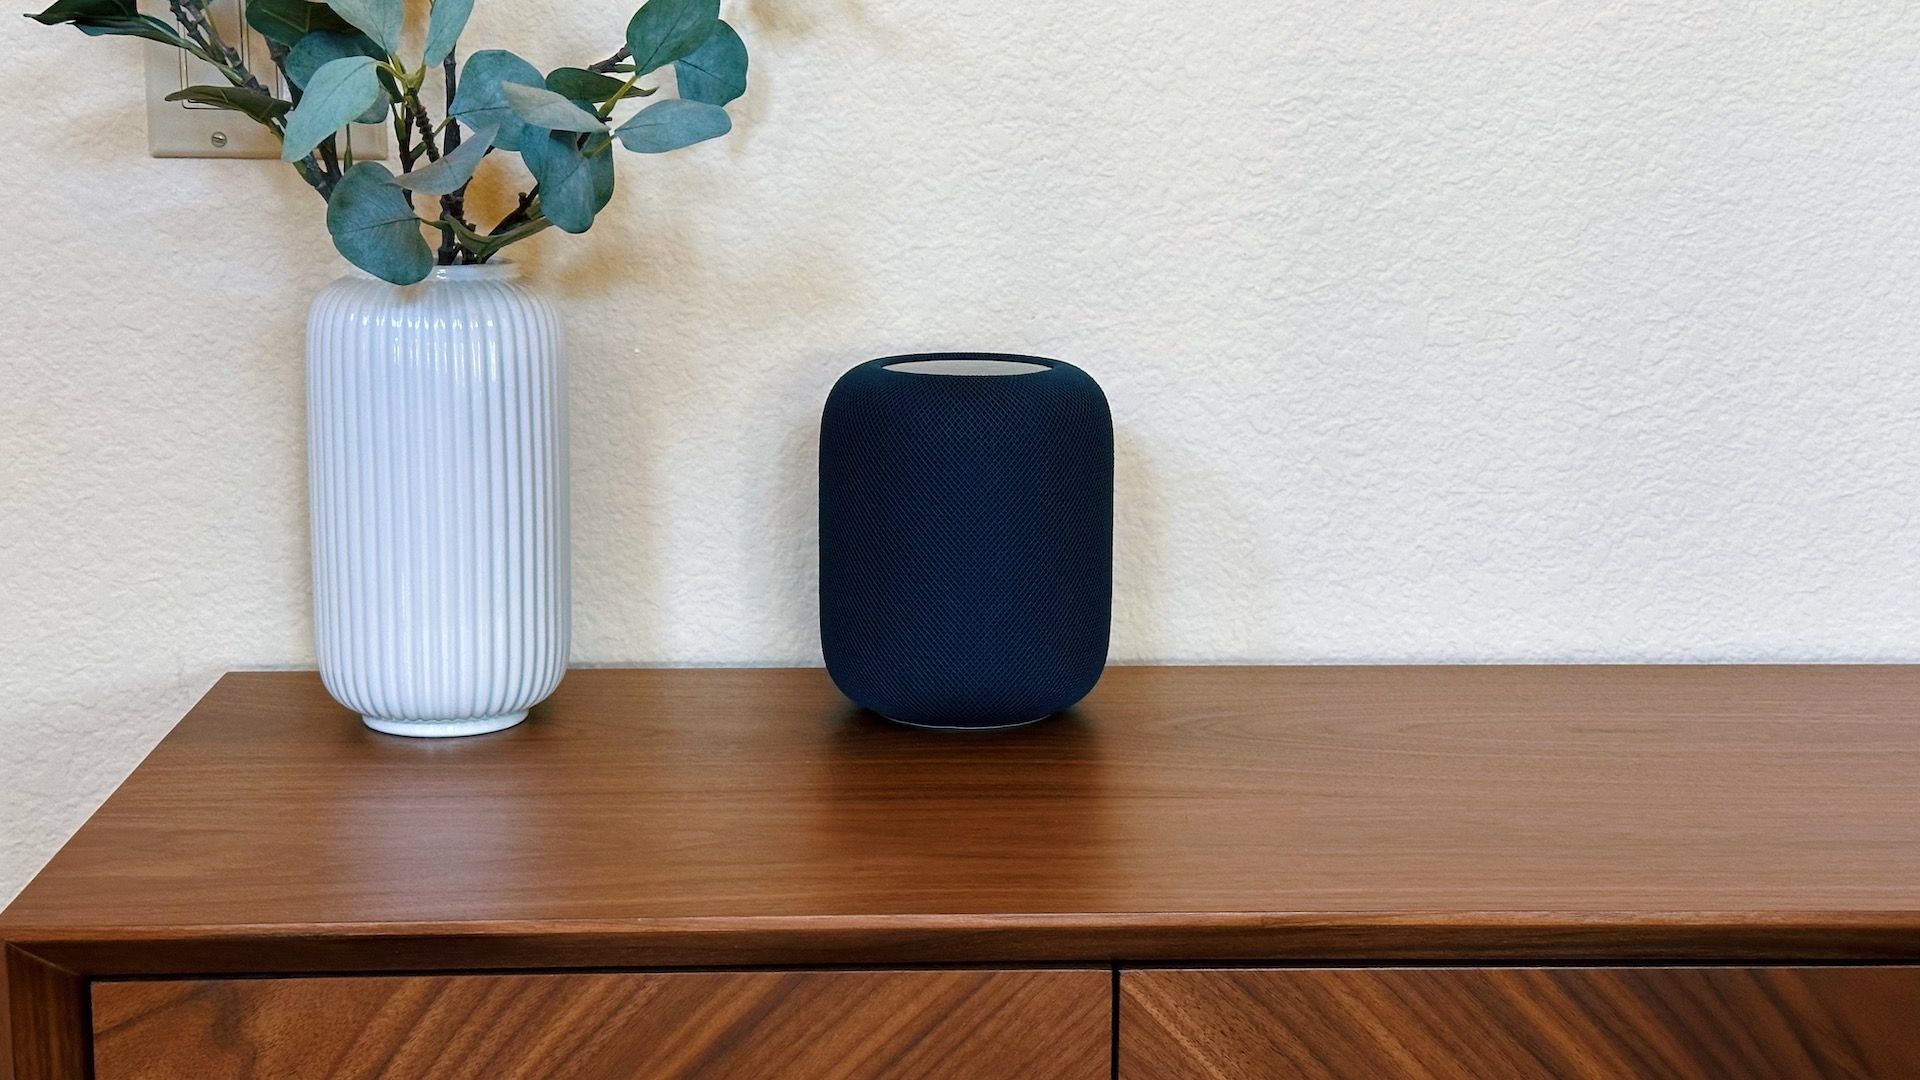 A HomePod sitting on a cabinet next to a plant.